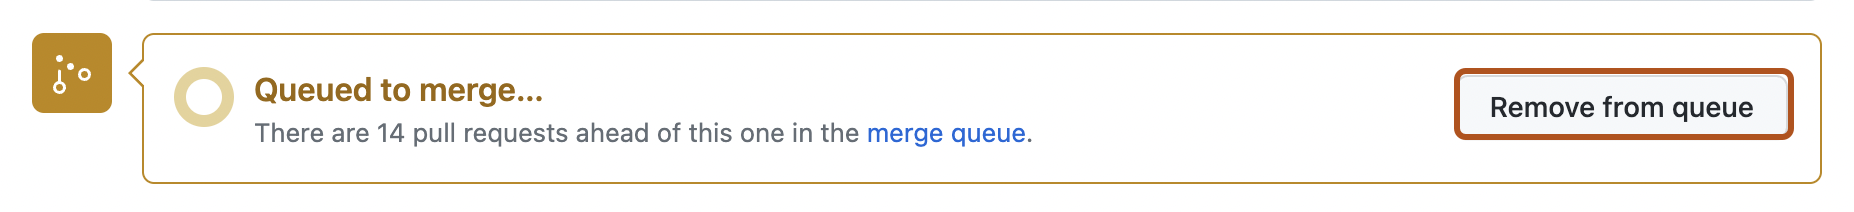 Screenshot of the merge queue message at the bottom of a pull request. The "Remove from queue" button is outlined in dark orange.